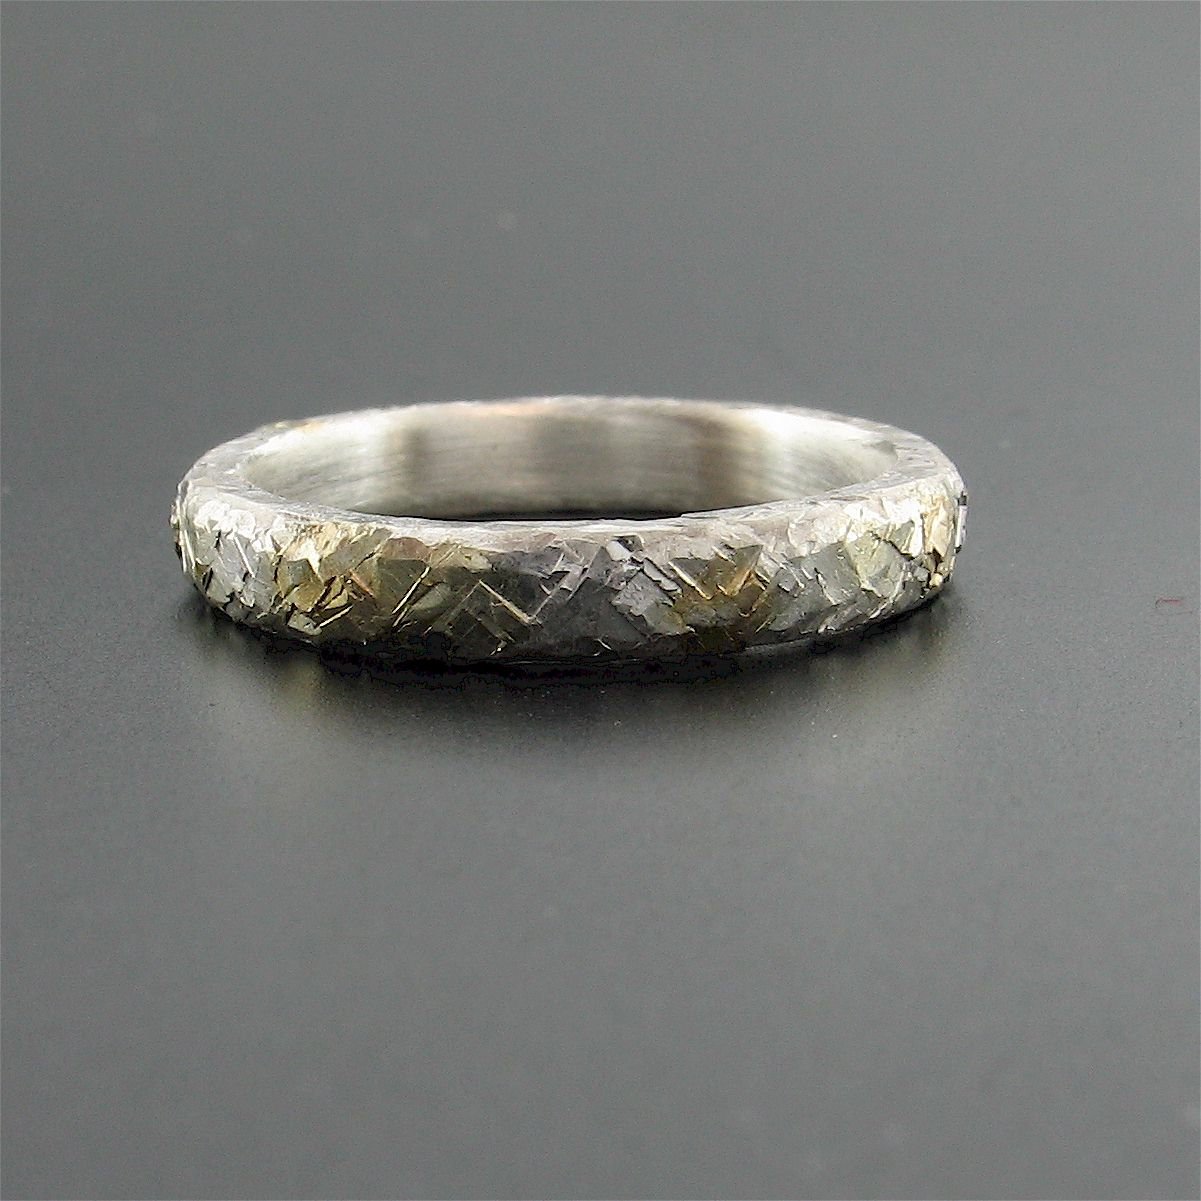 Silver and gold hammered thin wedding ring, Morning View design. - Cumbrian Designs